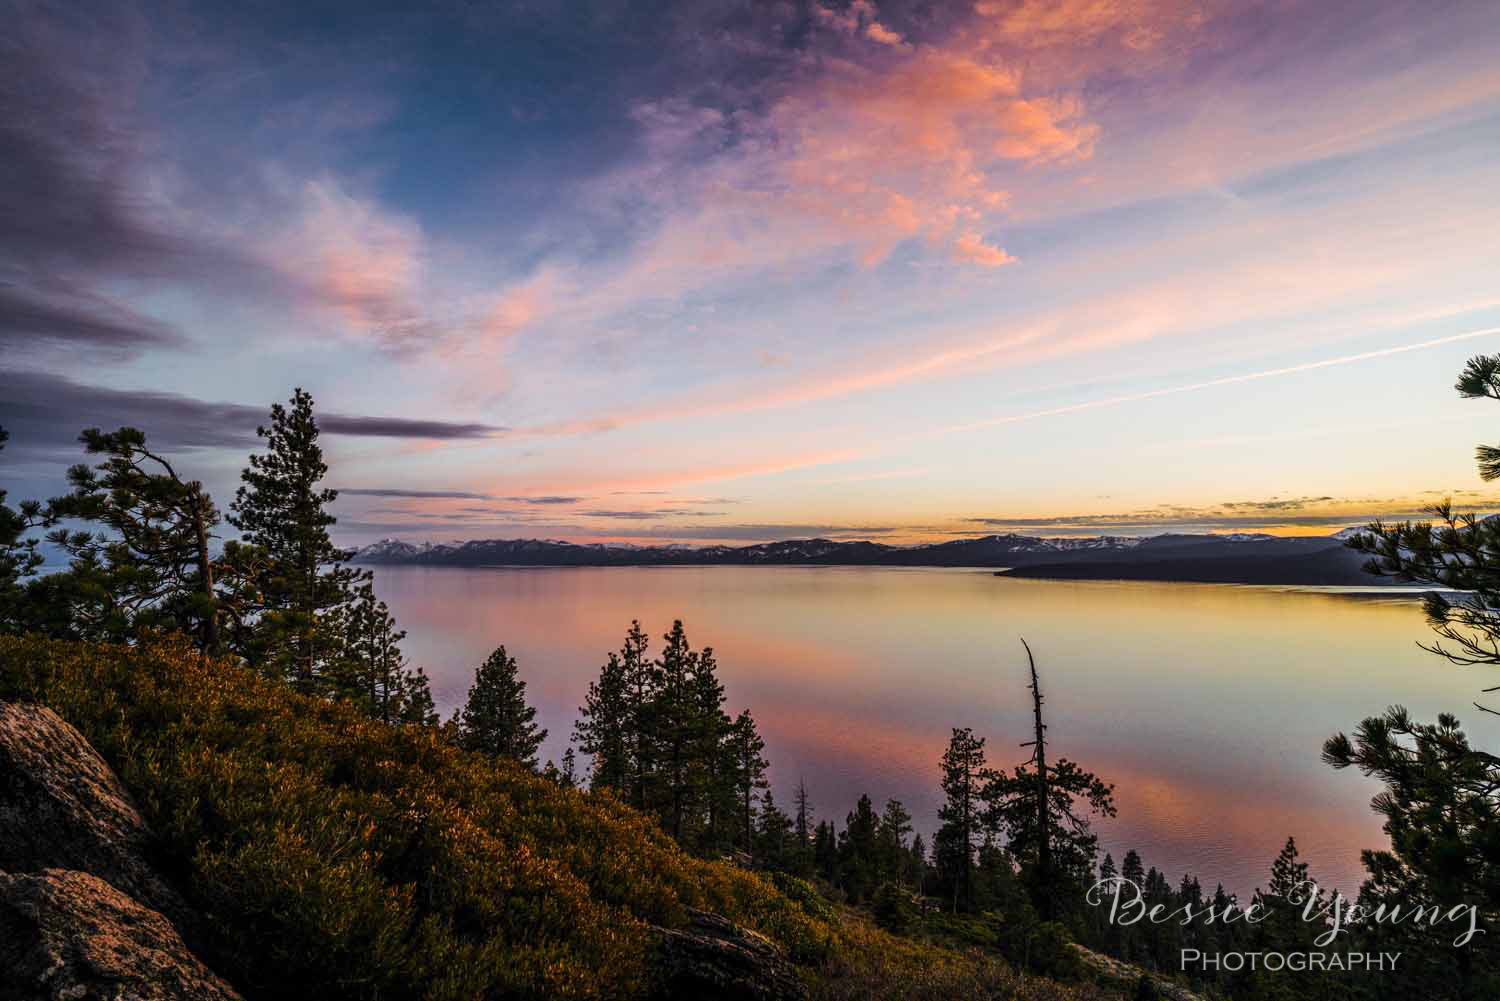 Lake Tahoe sunset photograph by Bessie Young Photography 2018 - Incline Village Photograph - Entryway decor - rustic home inspiration - rustic living room inspiration.jpg